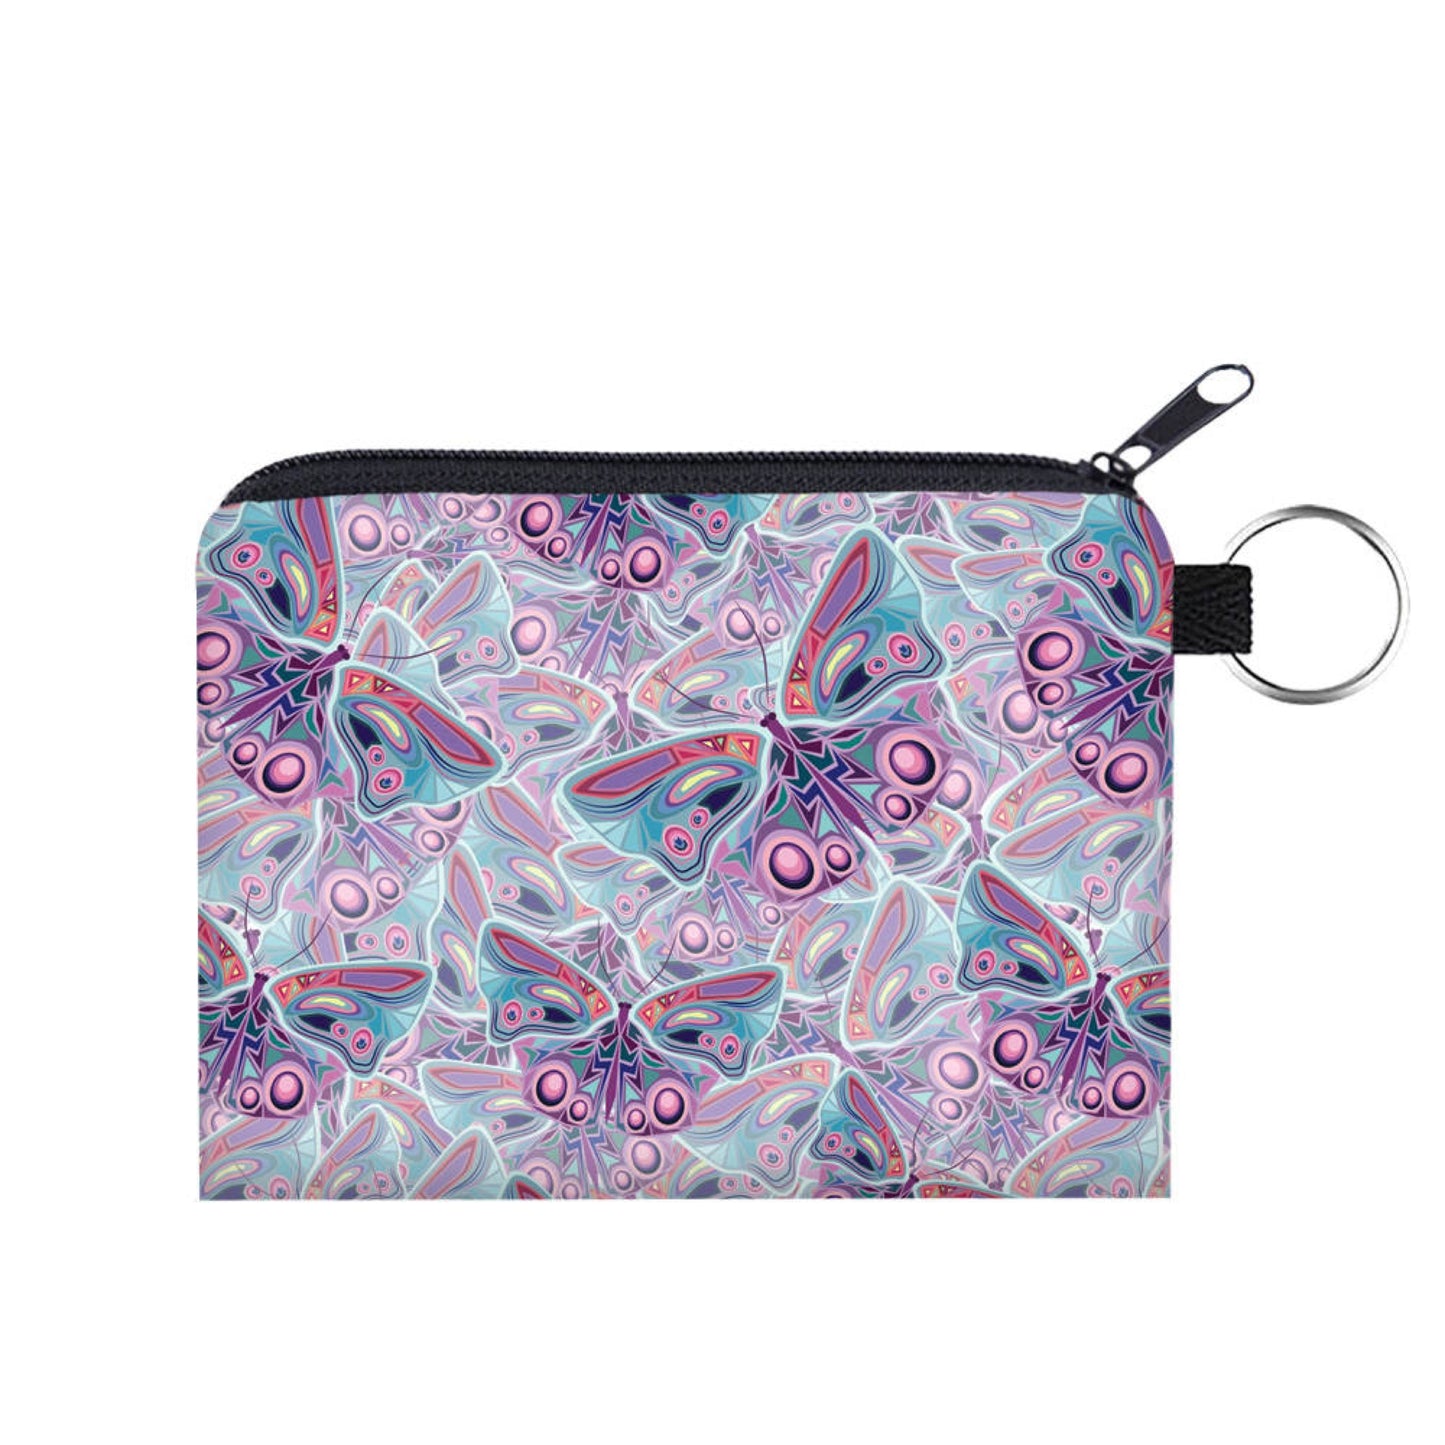 Pouch & Mini Pouch Set - Butterfly Mirage